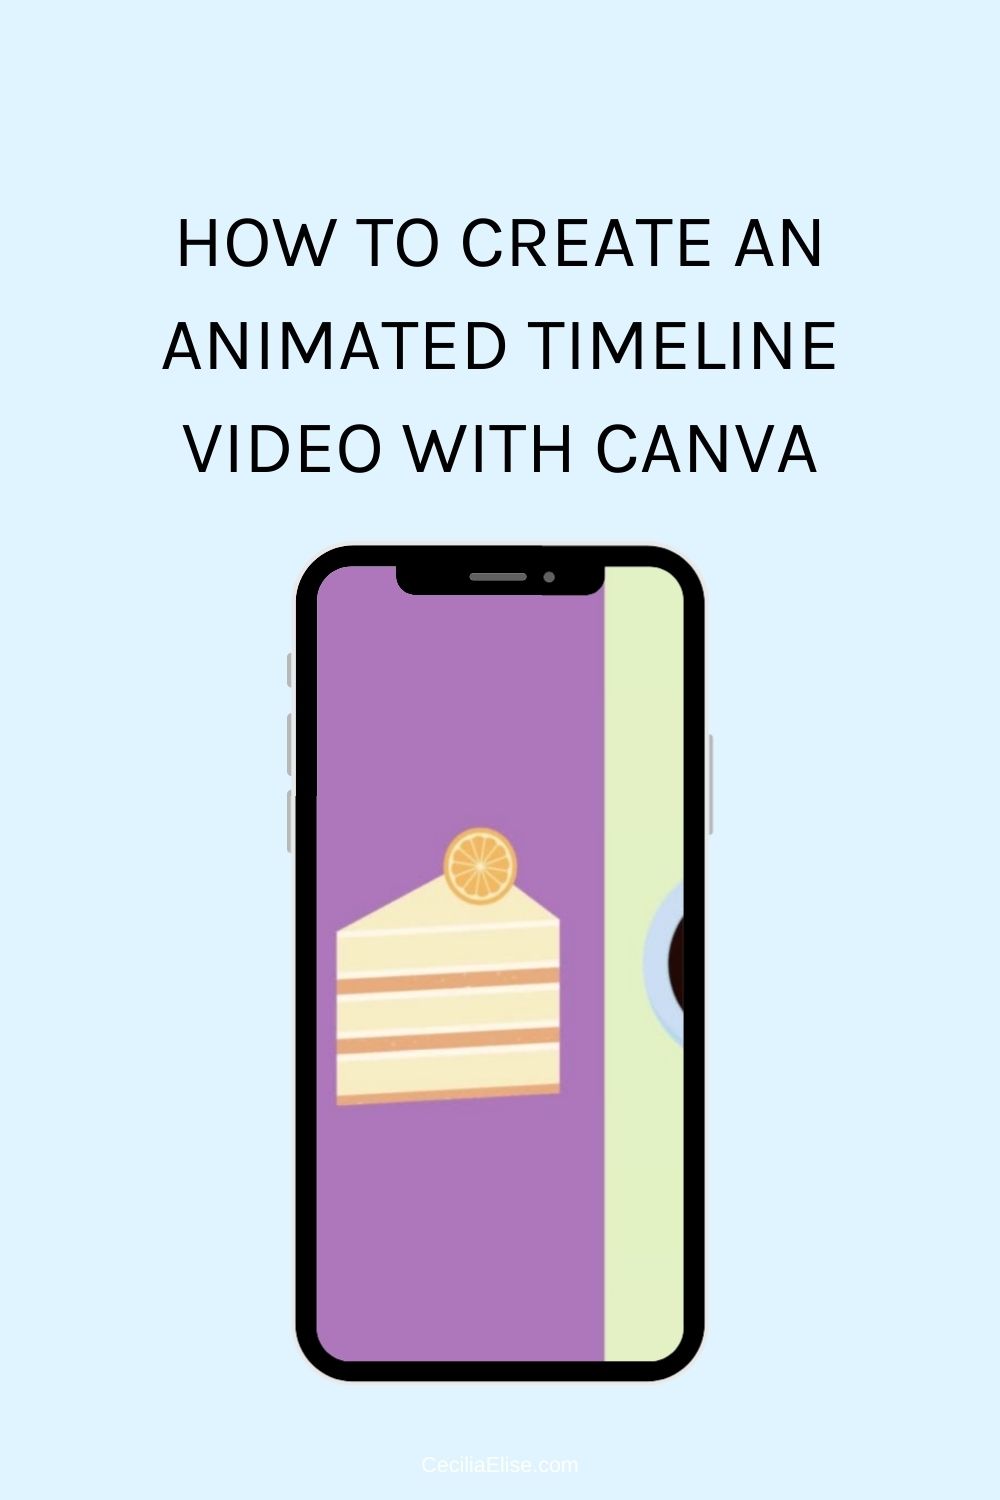 How to Create an Animated Timeline Video With Canva (1)